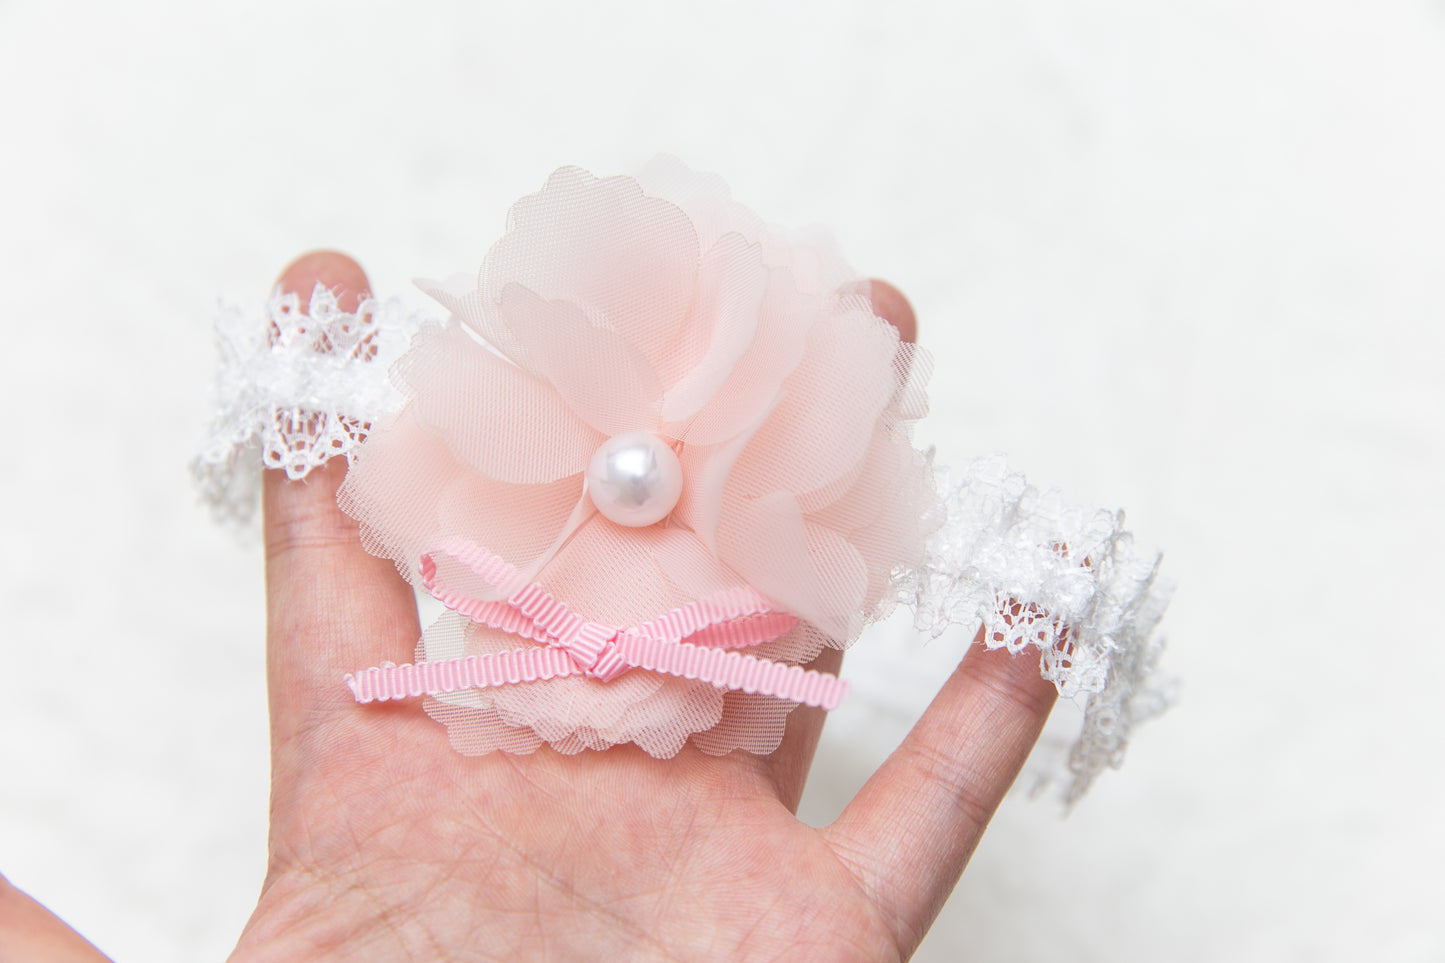 2 colors floral lace baby headband, white pink infant toddler headband headwear, newborn flower headband photography props one size fits all